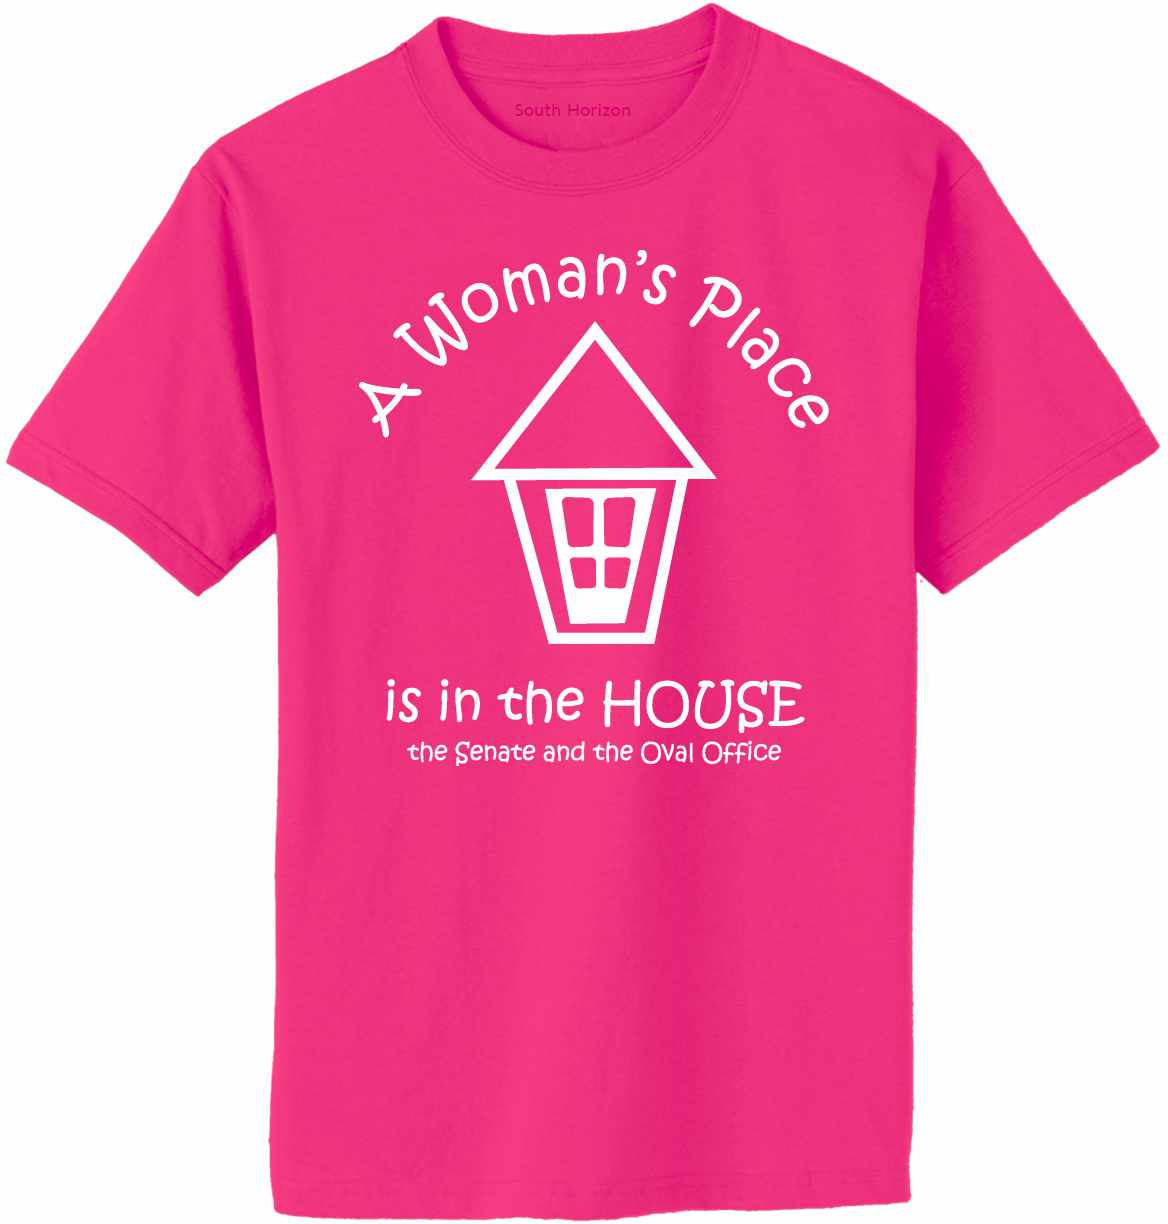 A Woman's Place is in the House, Senate & Oval Office Adult T-Shirt (#336-1)